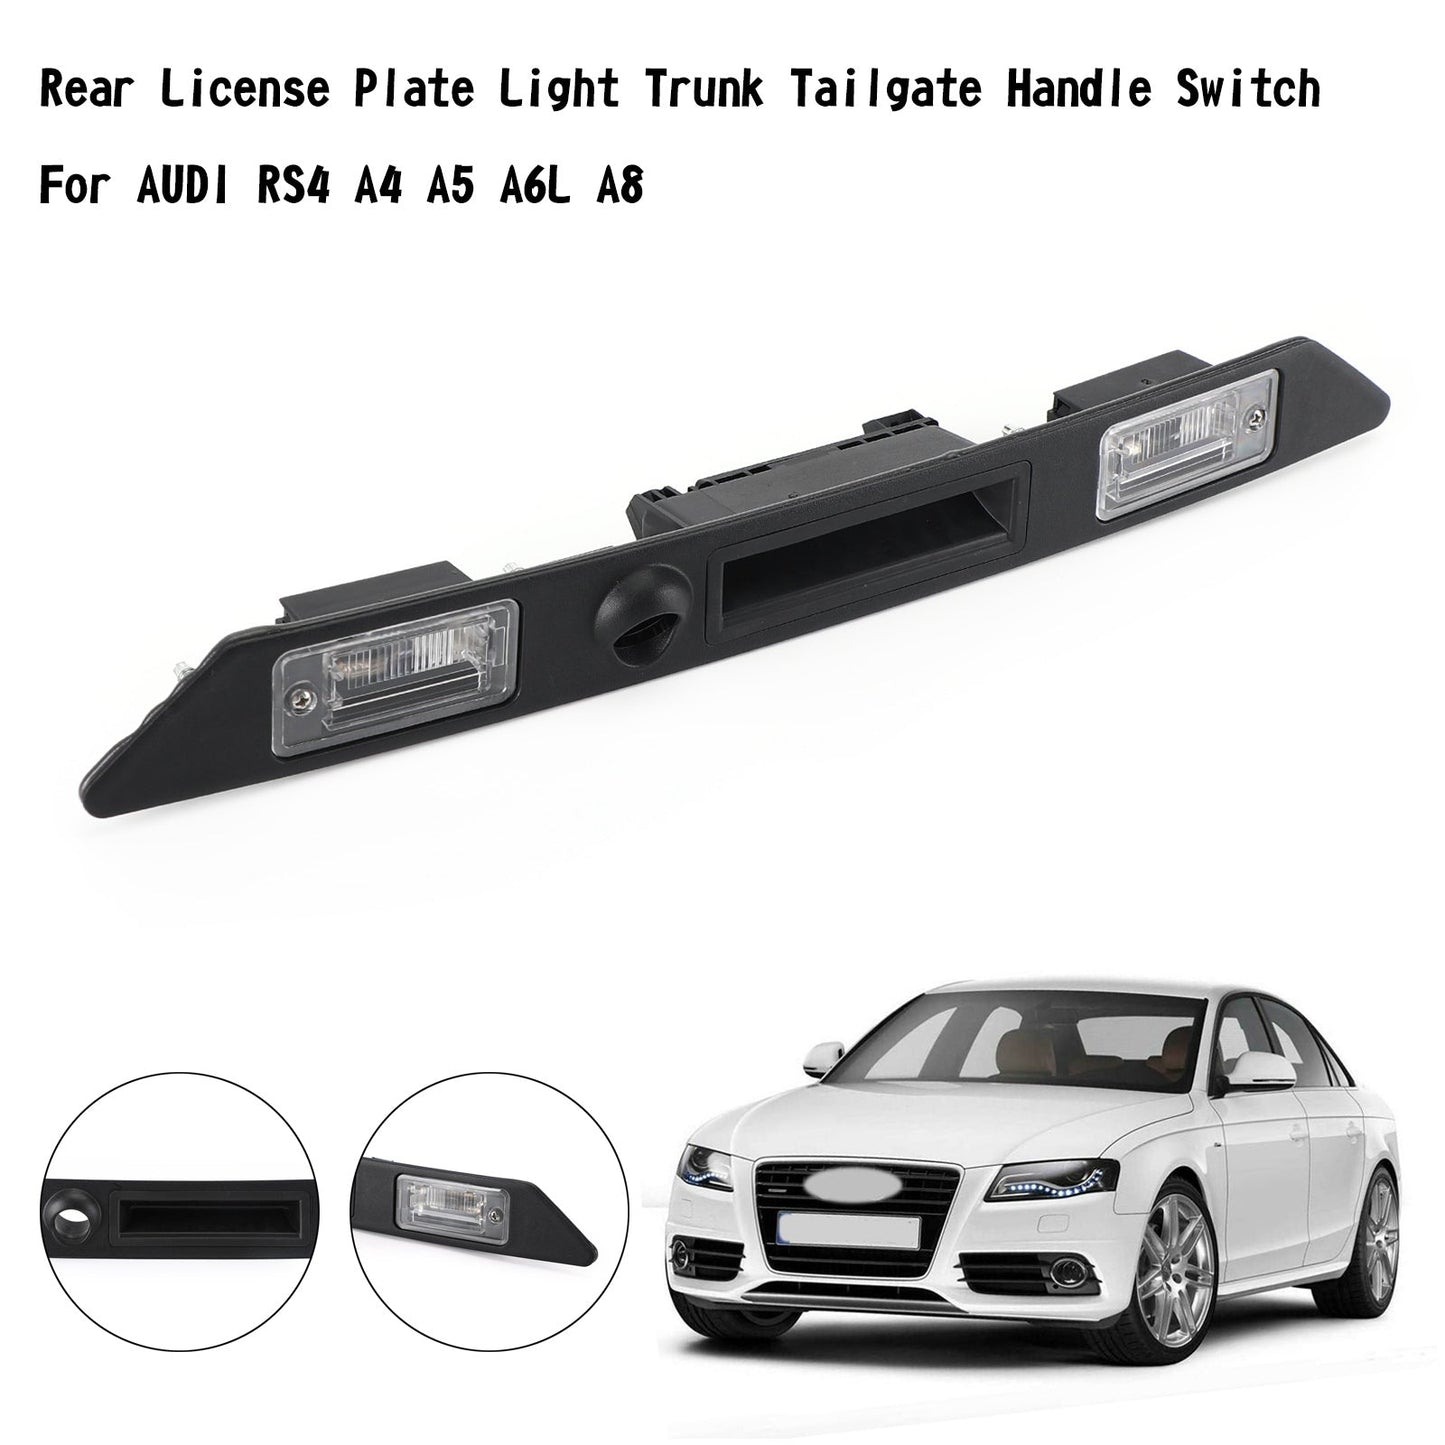 Rear License Plate Light Trunk Tailgate Handle Switch For AUDI RS4 A4 A5 A6L A8